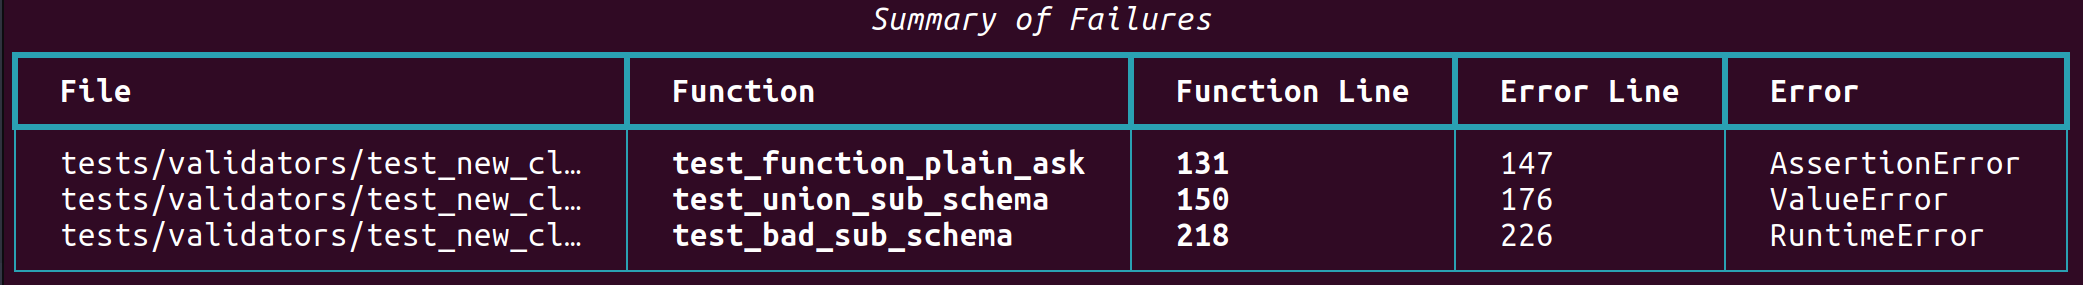 table-of-failures.png